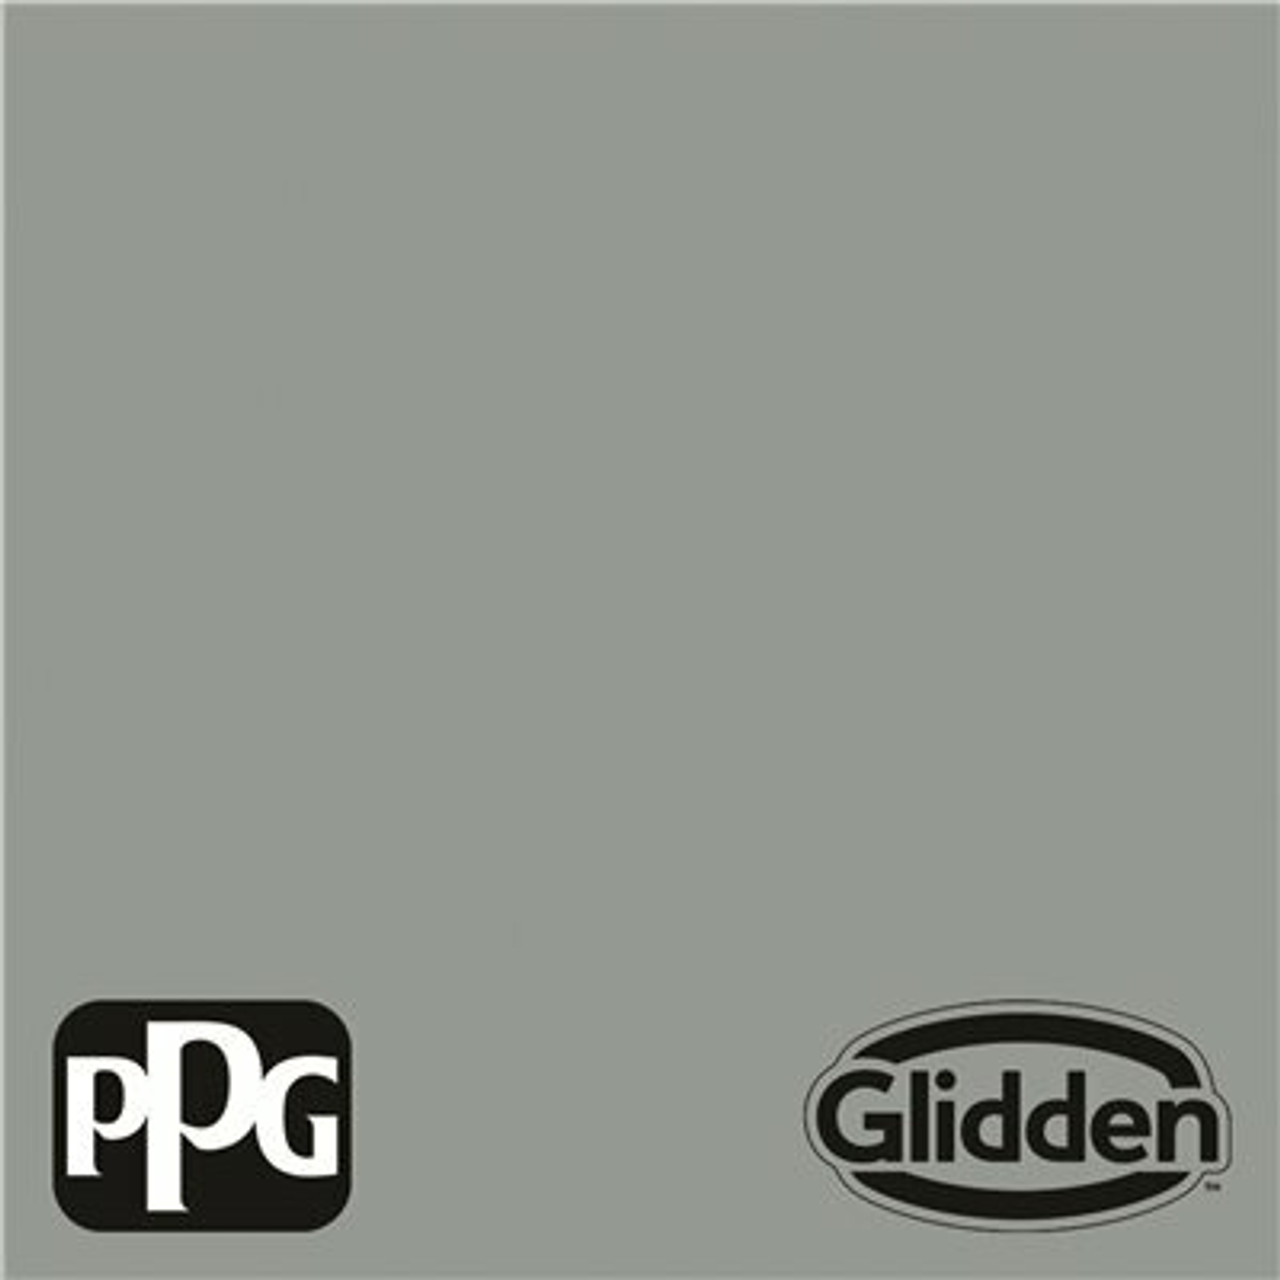 Glidden Premium 5 Gal. #Ppg1036-4 After The Storm Satin Interior Latex Paint